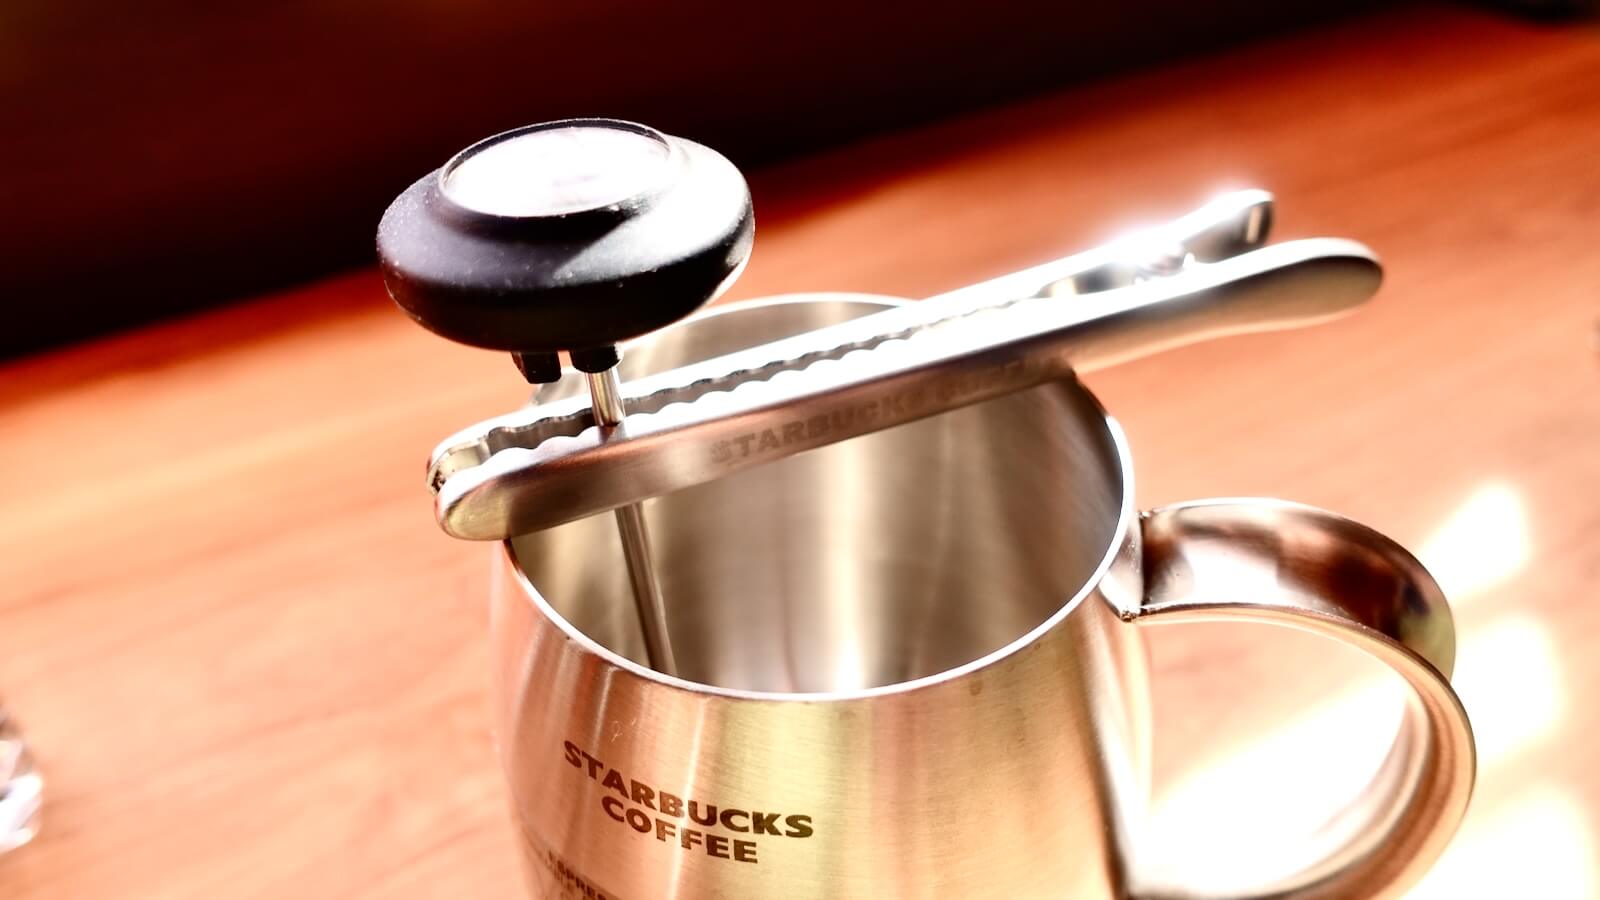 Starbucks Espresso Kit Clips hold the thermometer in place